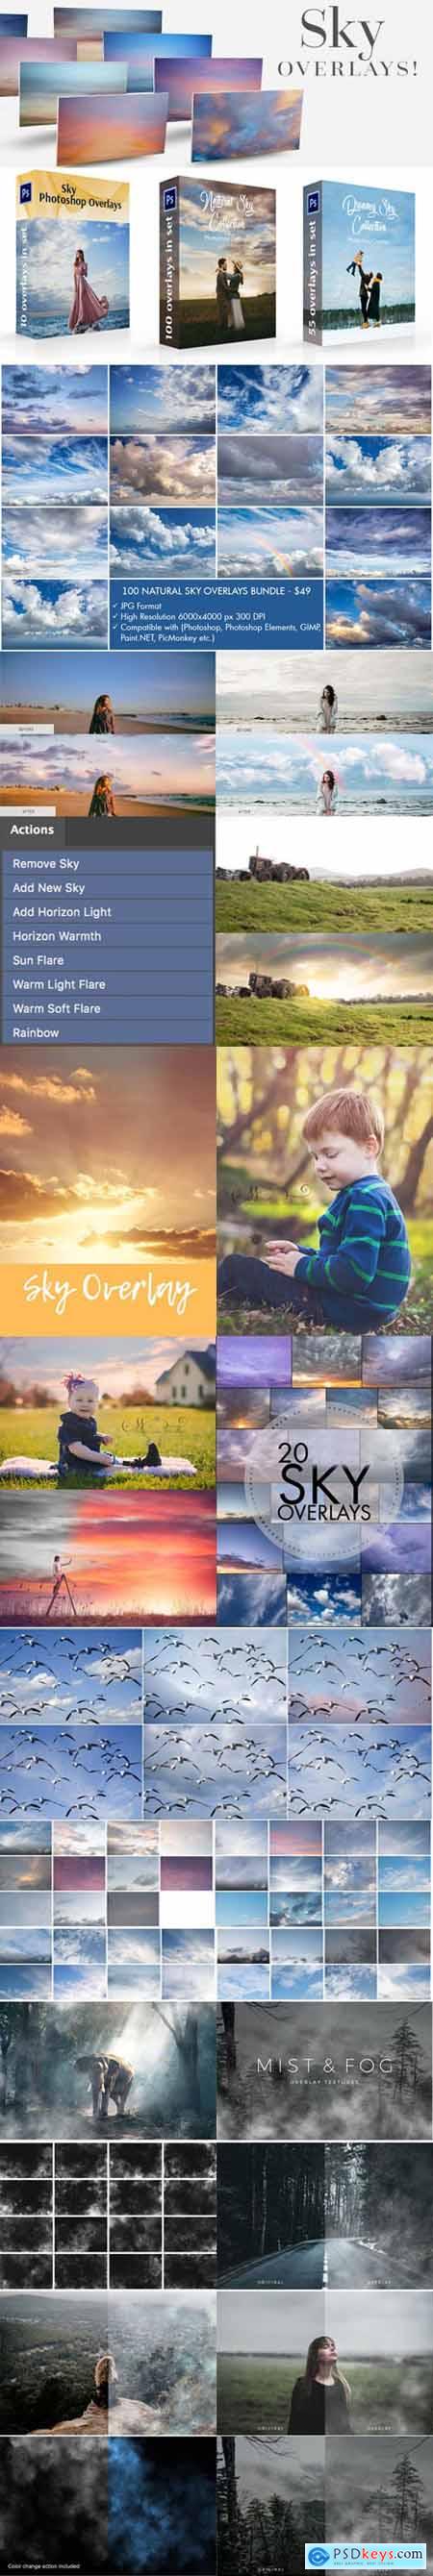 Big Bundle of Sky Overlay + Photoshop Actions for Photographers and Digital Artists